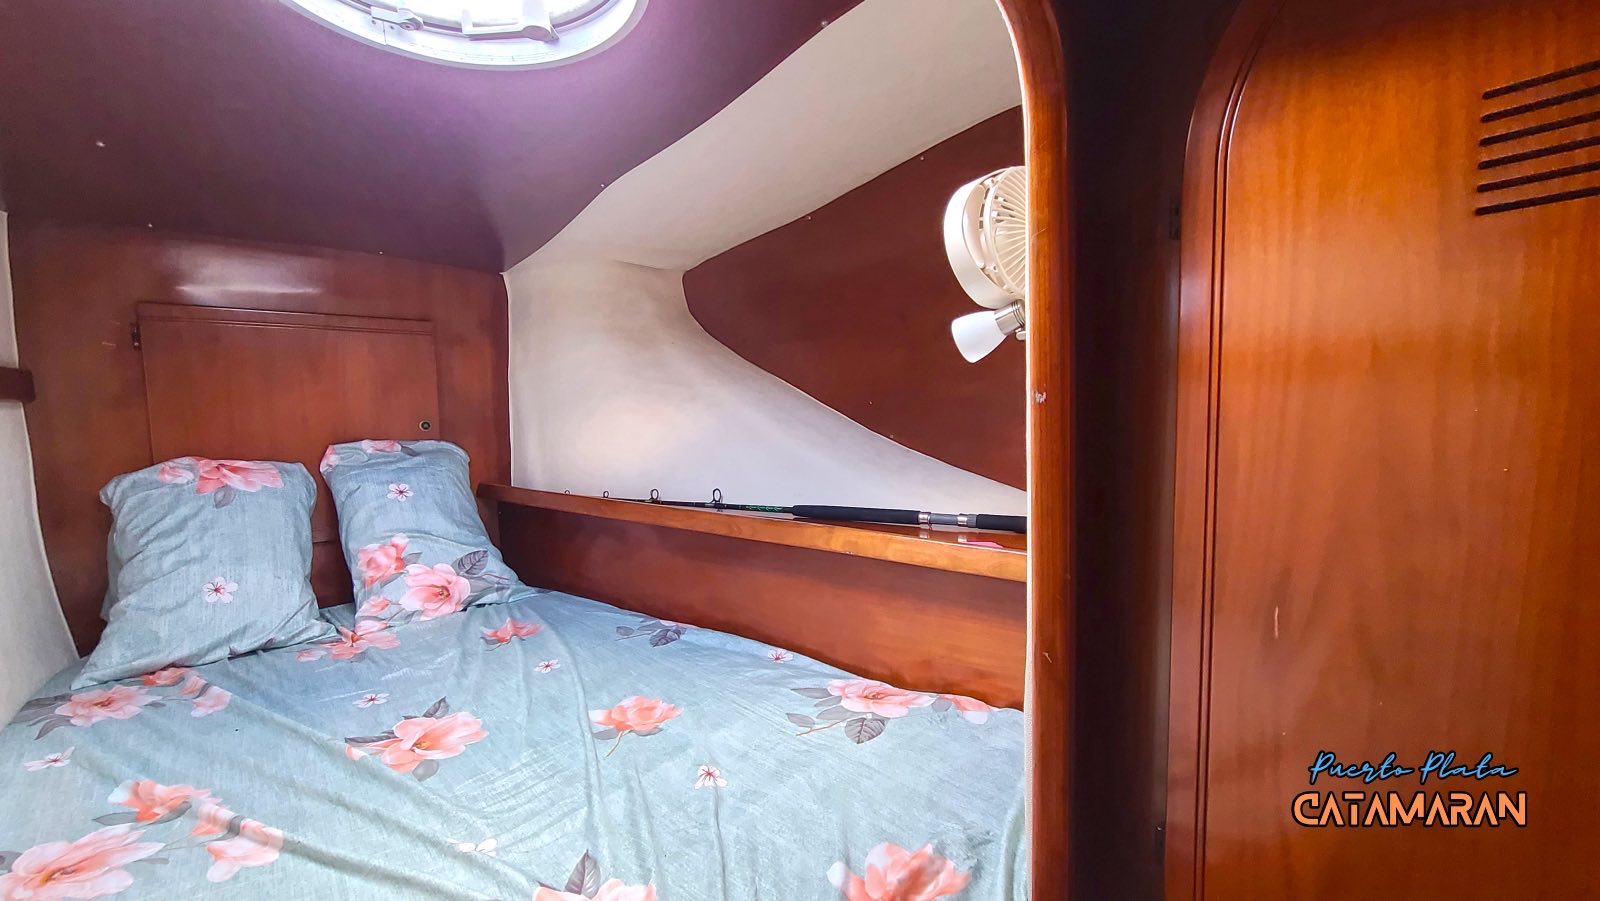 A starboard stateroom in the catamaran